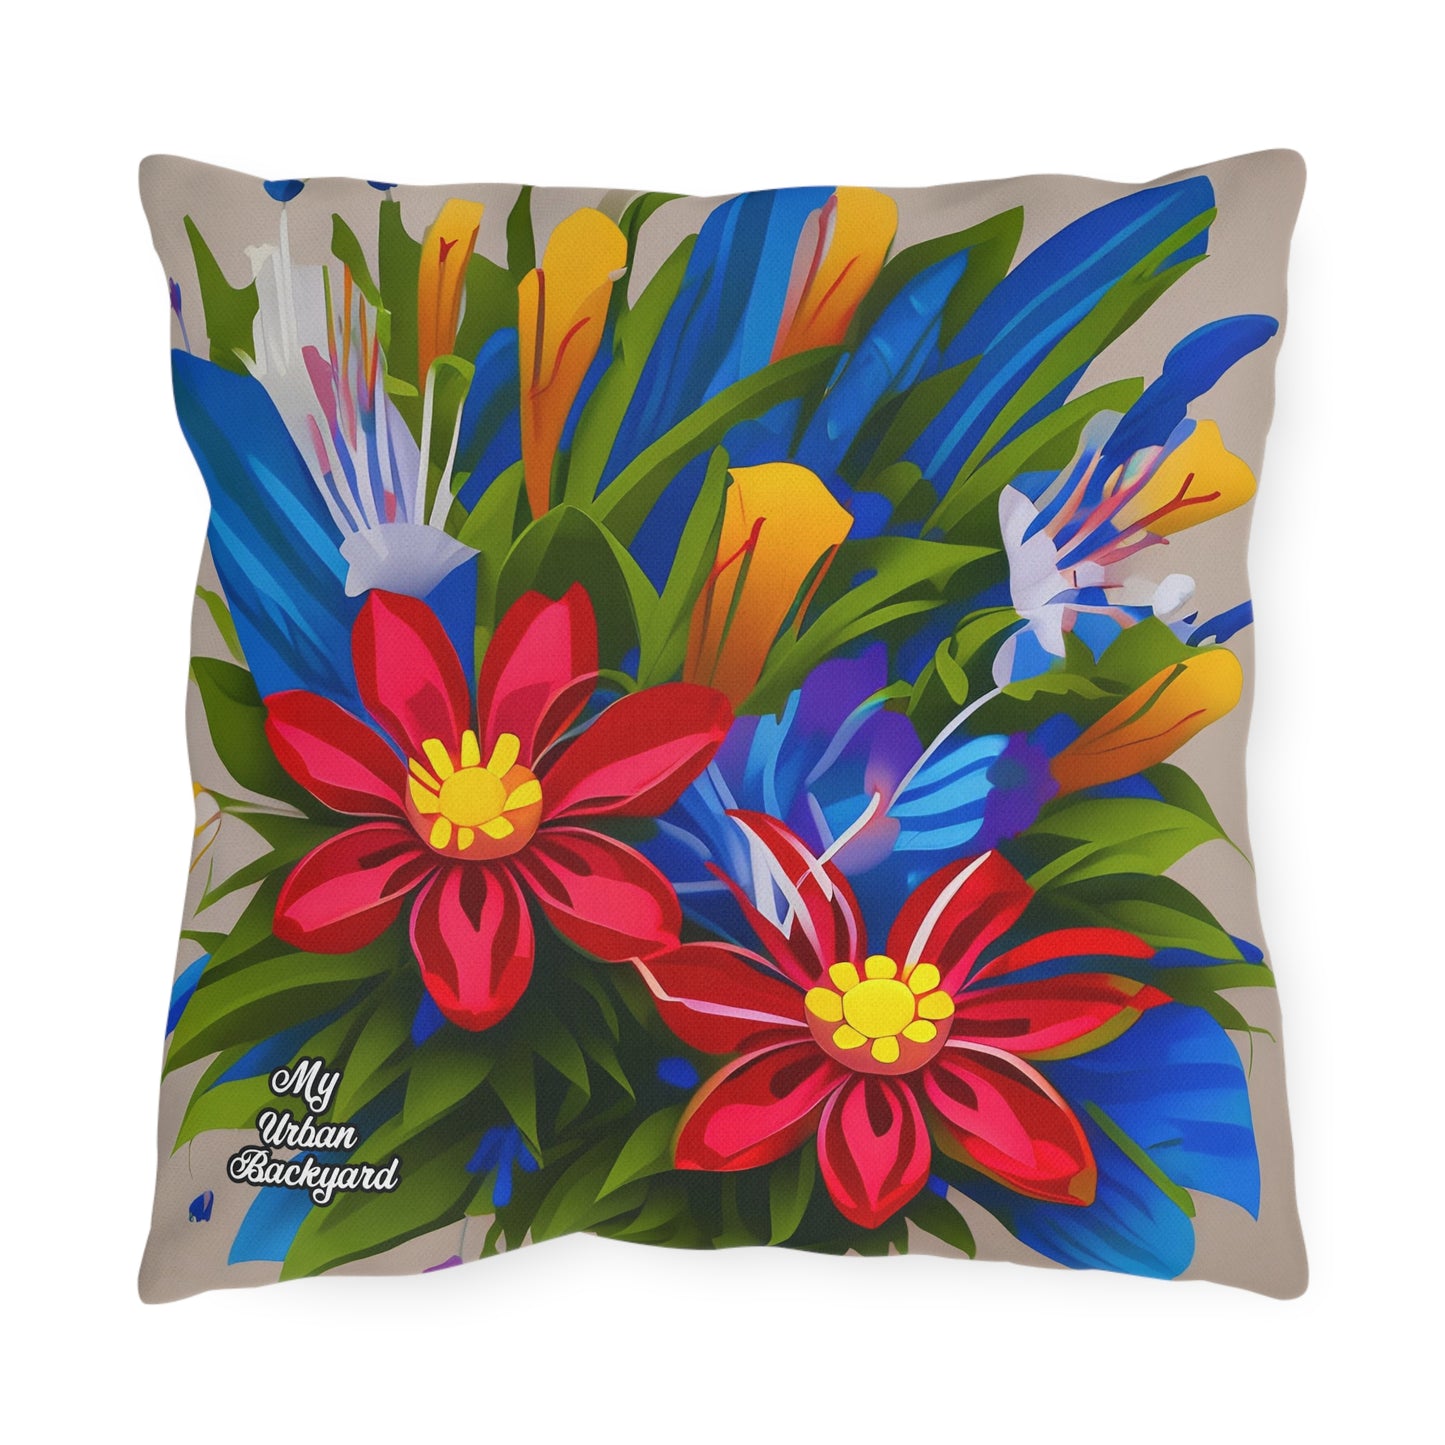 Vibrant Wildflowers, Versatile Throw Pillow - Home or Office Decor